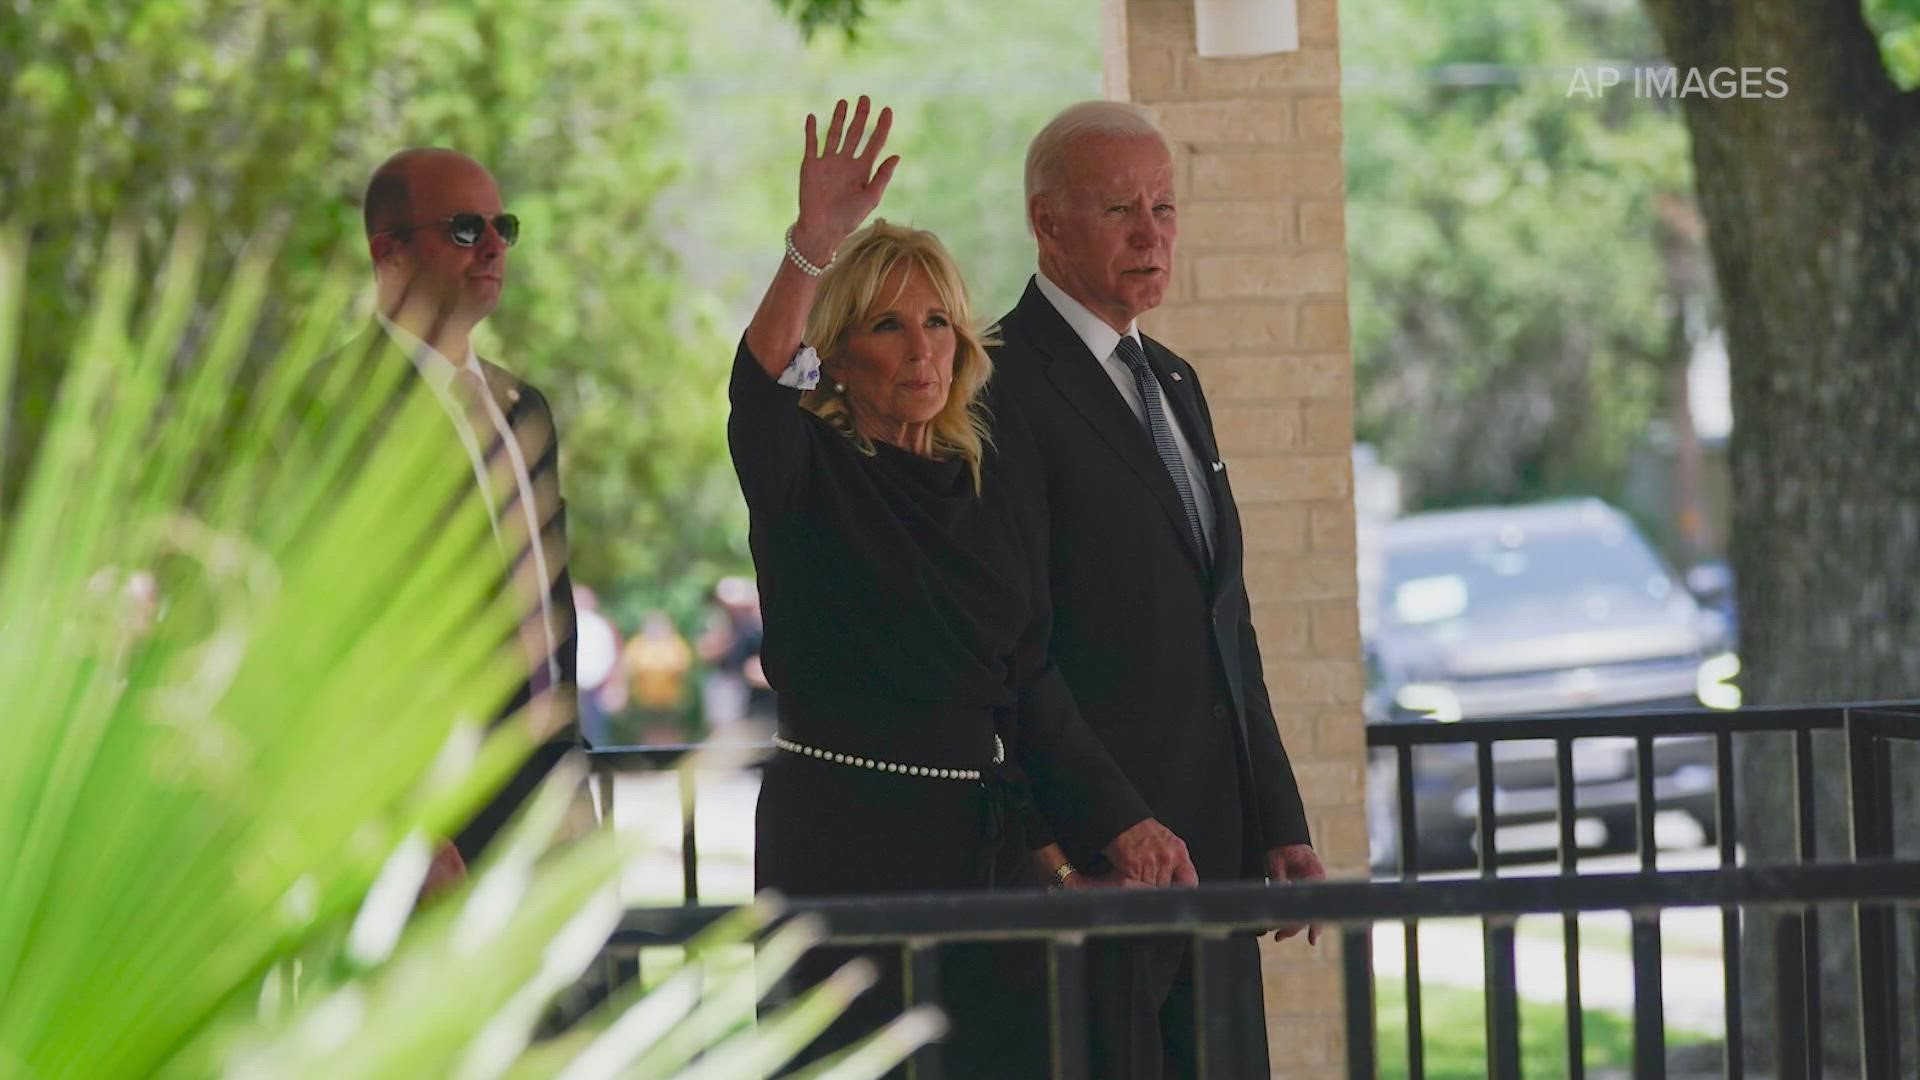 While visiting Uvalde, the president and first lady attended mass at Sacred Heart Catholic Church to remember the 21 victims of the elementary school shooting.